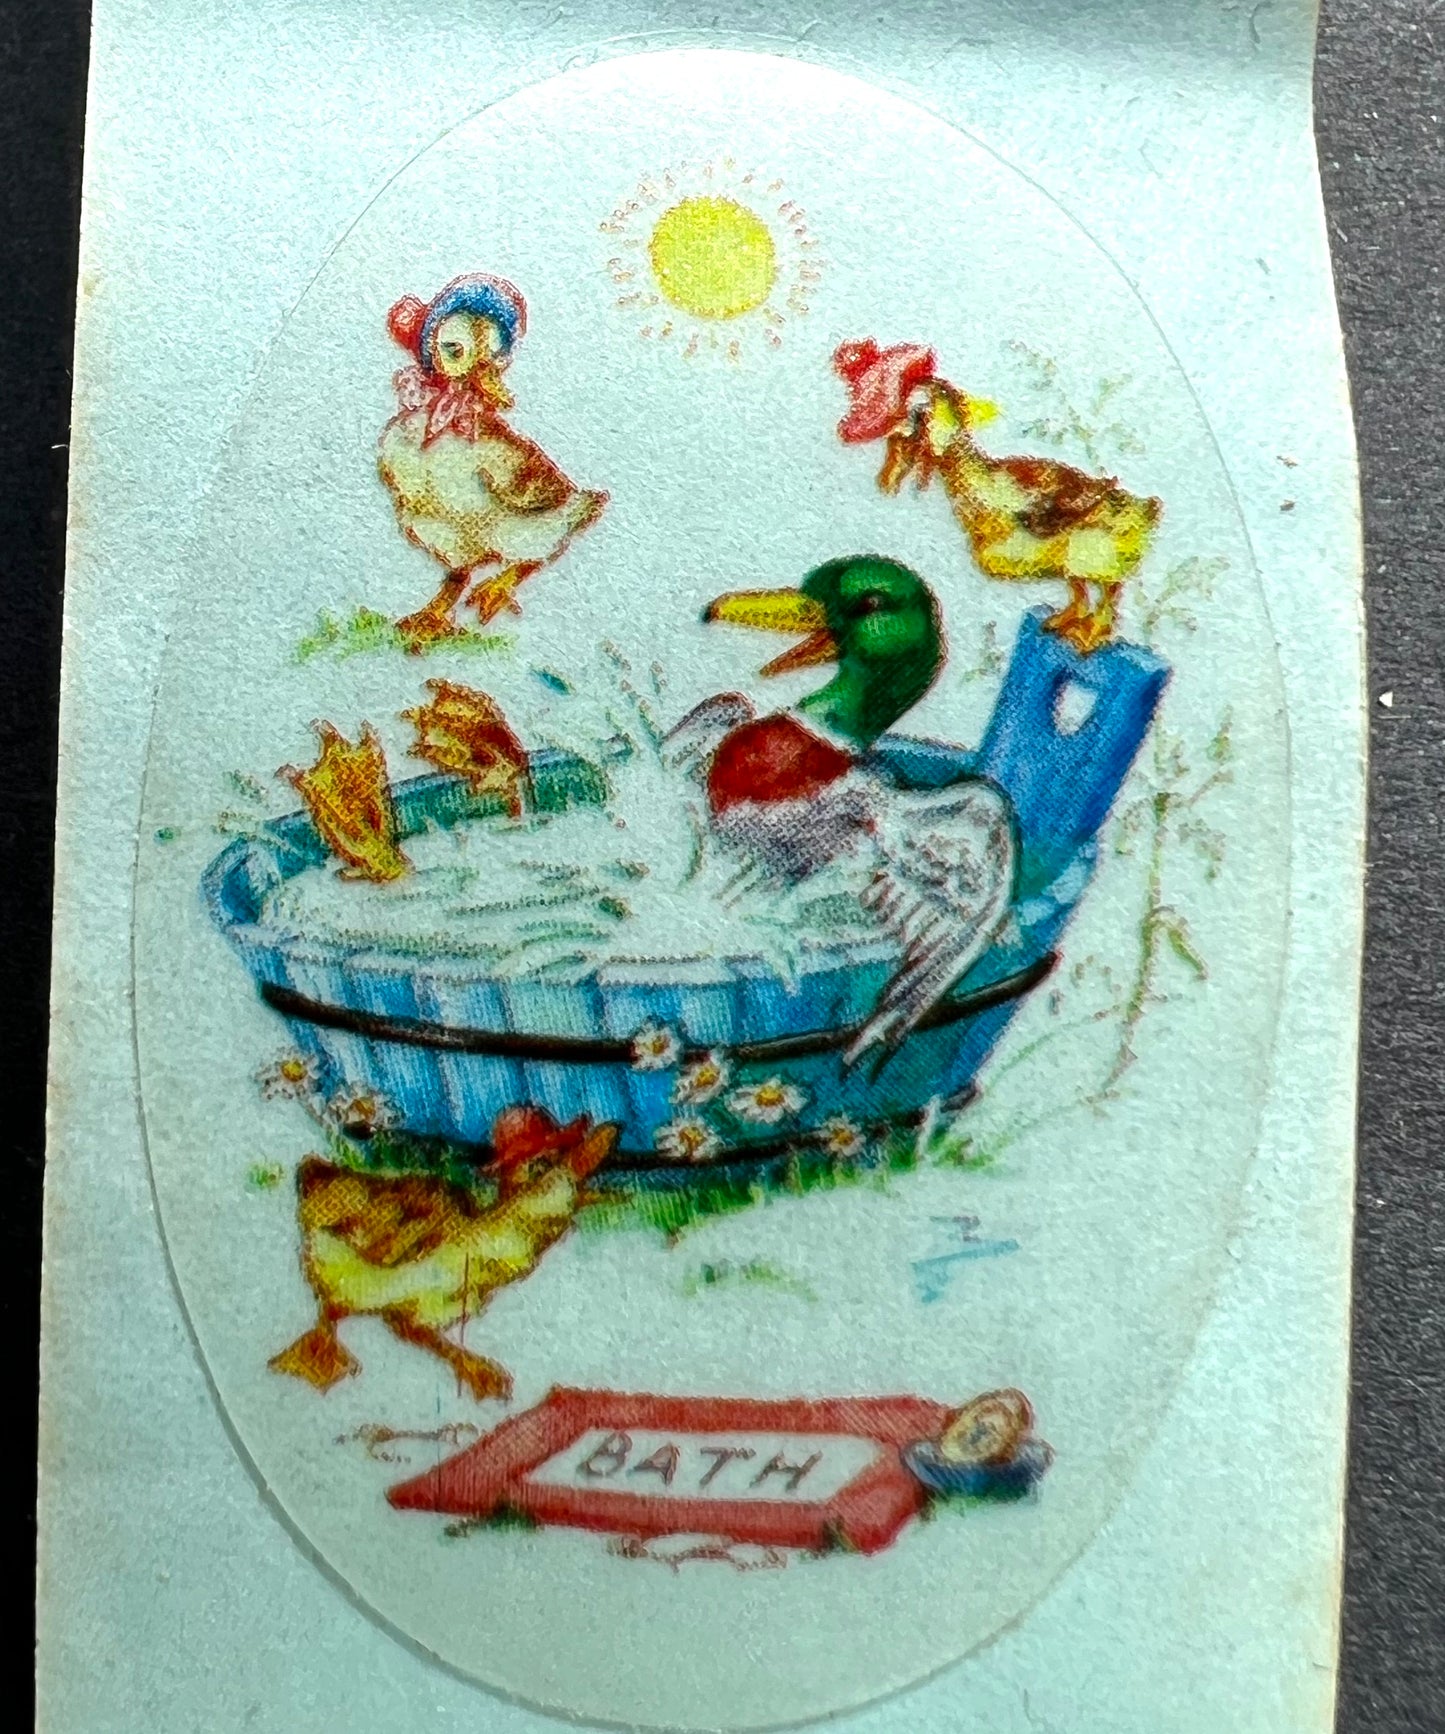 6 Delightful 1950s Bathtime Stickers for Babies